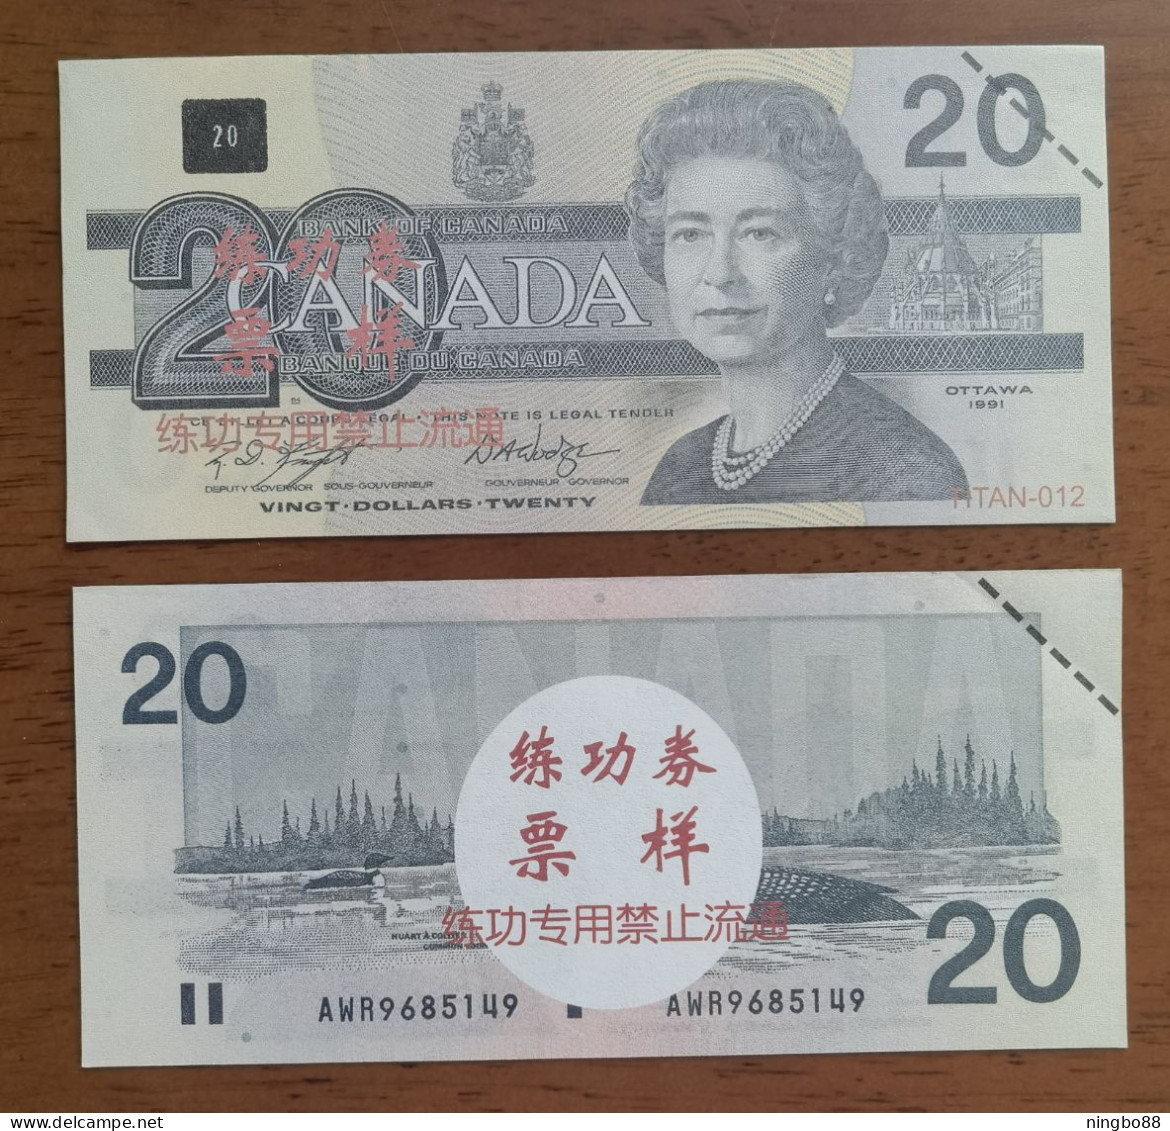 China BOC Bank (bank Of China) Training/test Banknote,Canada Dollars D Series $20 Note Specimen Overprint - Canada